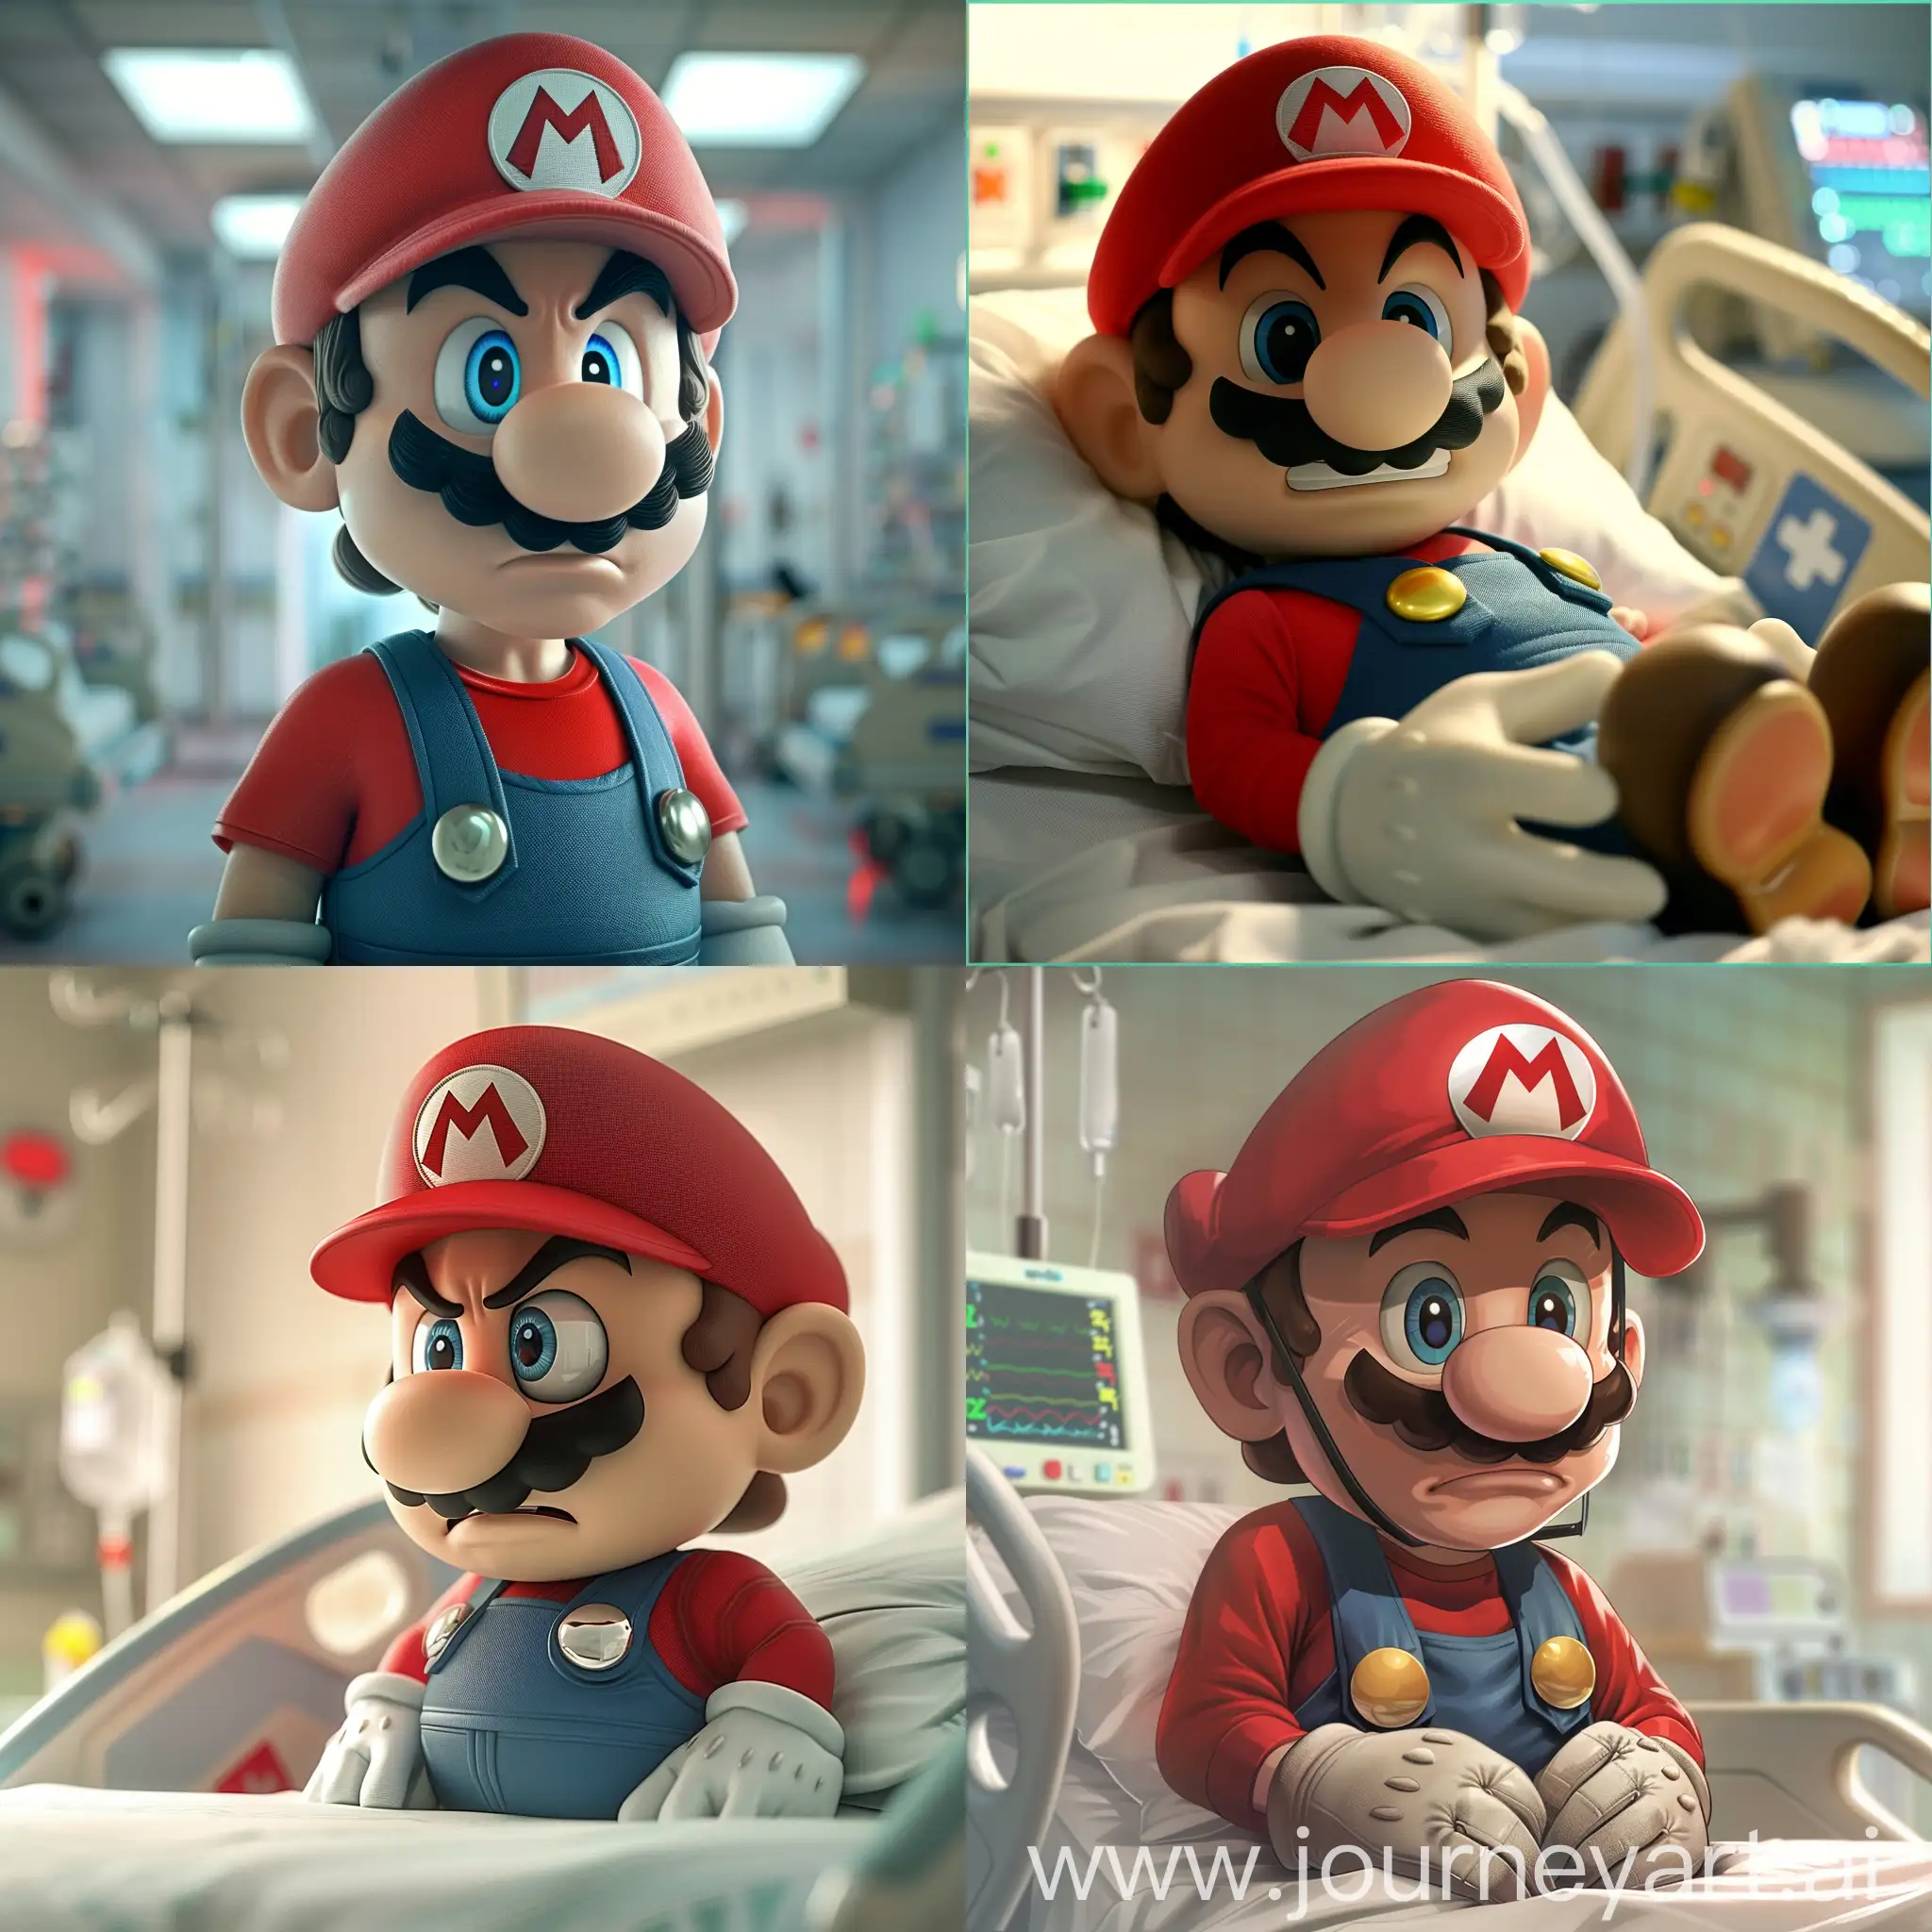 Super mario sad in the hospital because he got a disease 